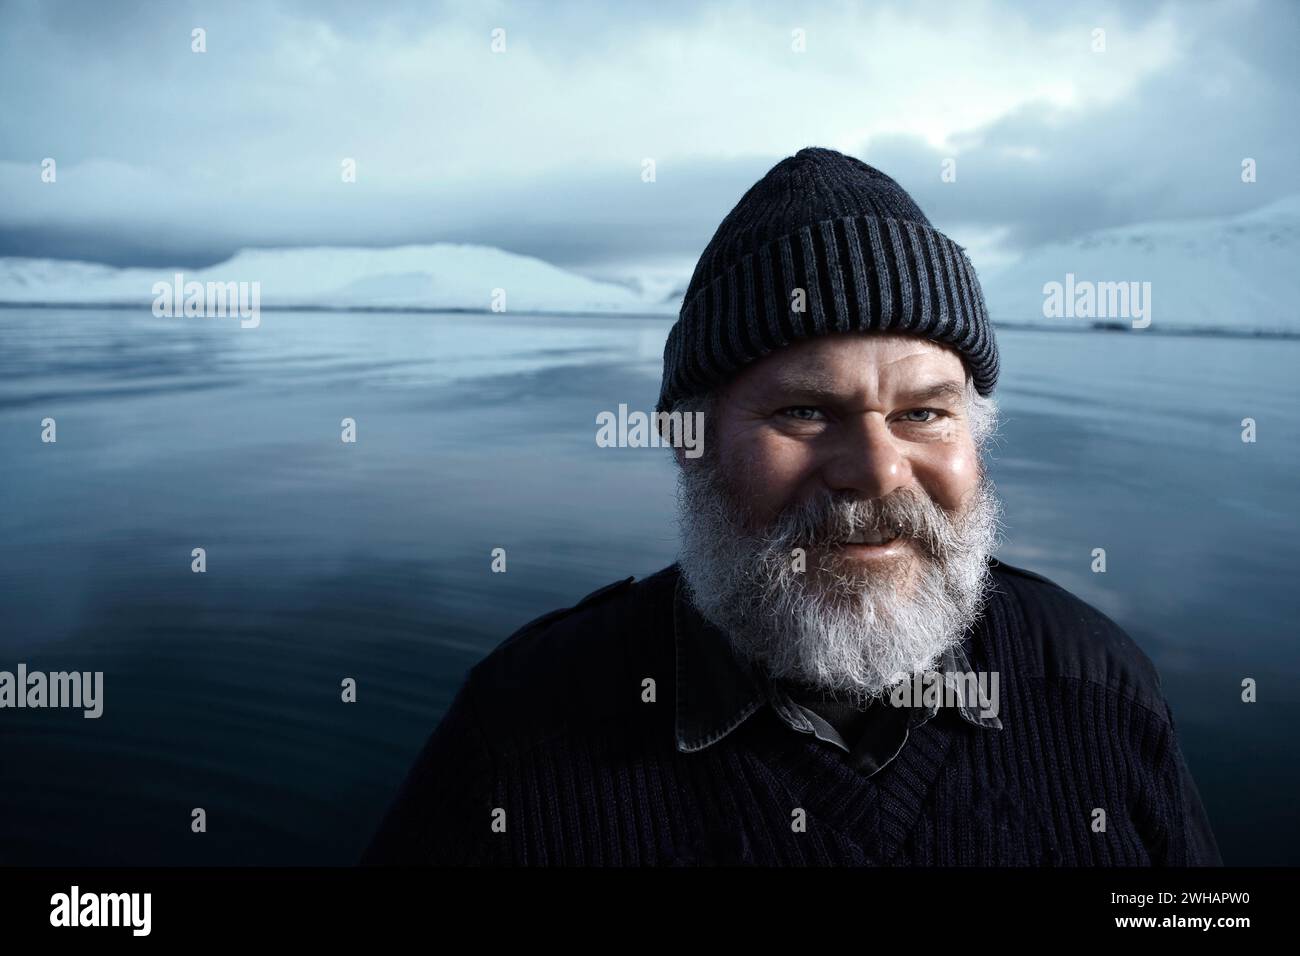 A man with a grey beard in the winter landscape Stock Photo